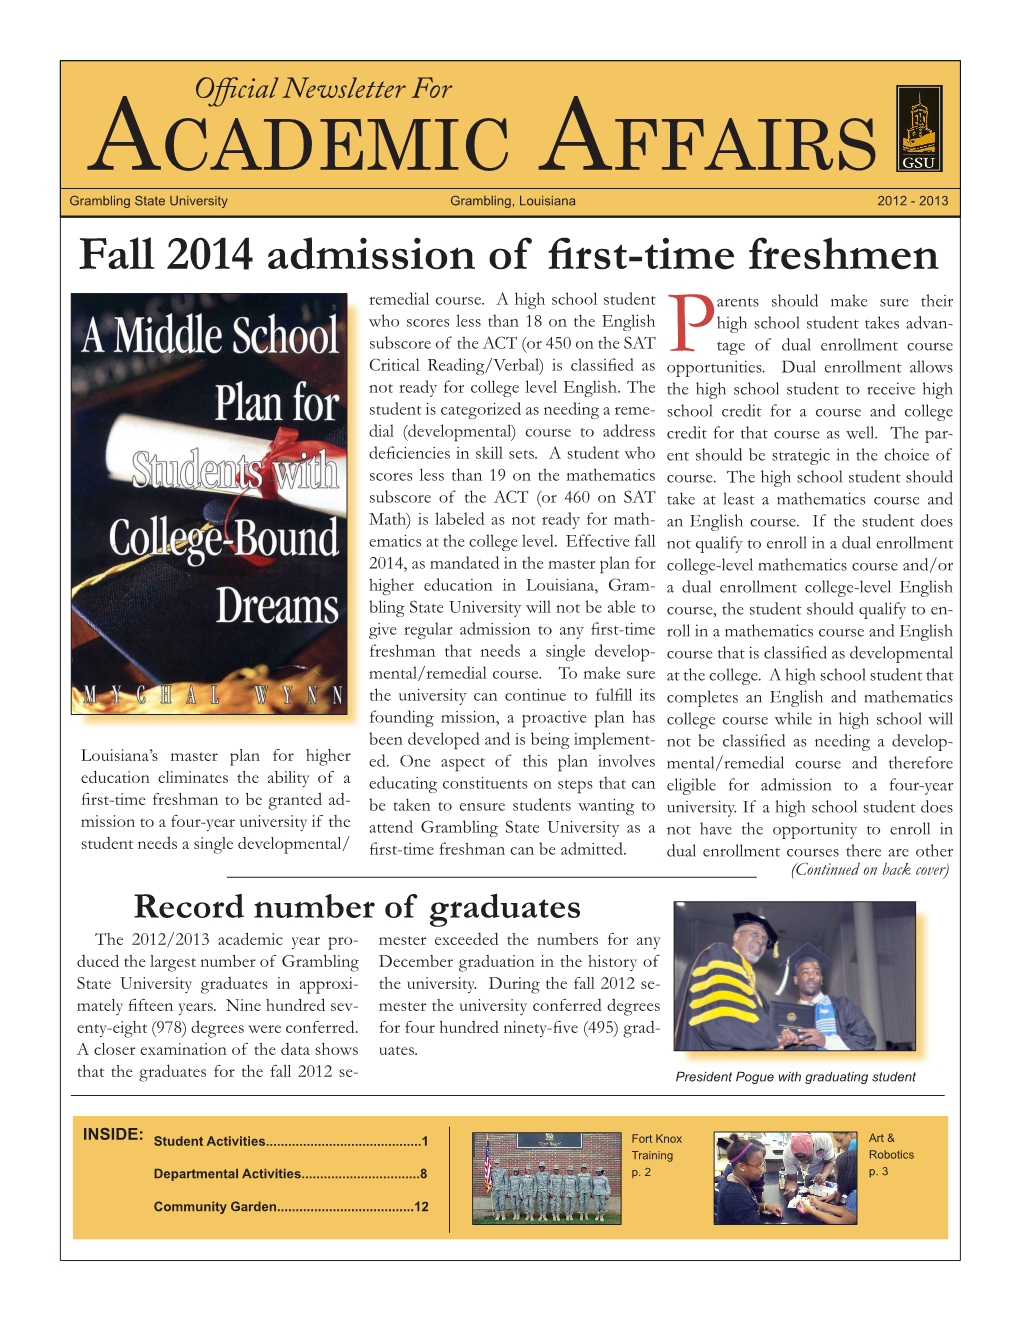 Academic Affairs Newsletter Freshmen 2014 Admissions Options Available That Will Support Ad- Sity Website at Taken in Completing the Exam